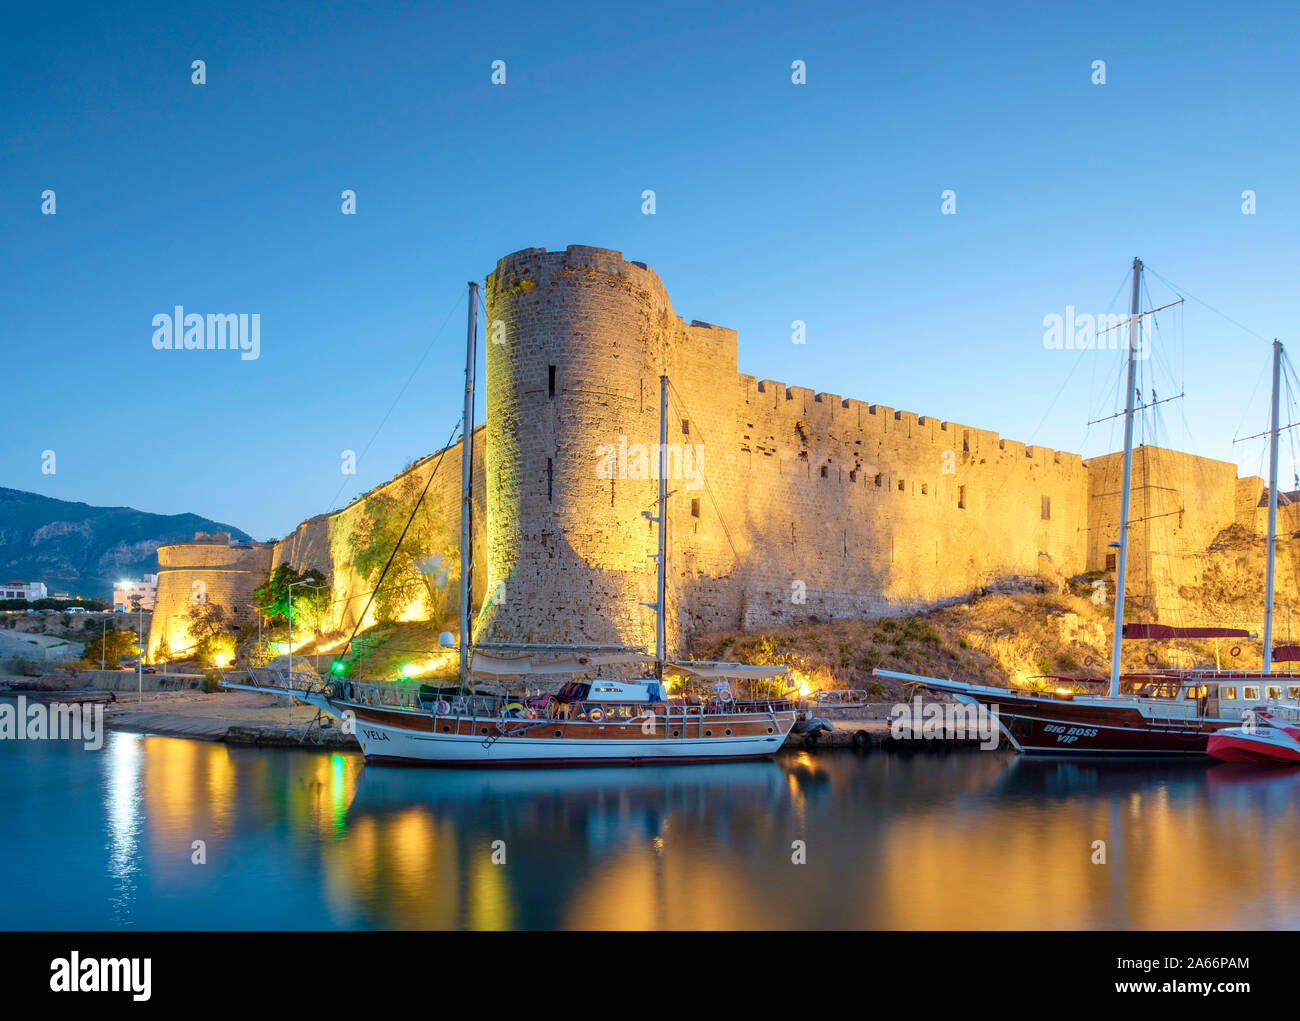 Boats in front of Kyrenia Castle (Girne Kalesi) at night, Kyrenia (Girne), Kyrenia (Girne) District, Cyprus (Northern Cyprus). Stock Photo